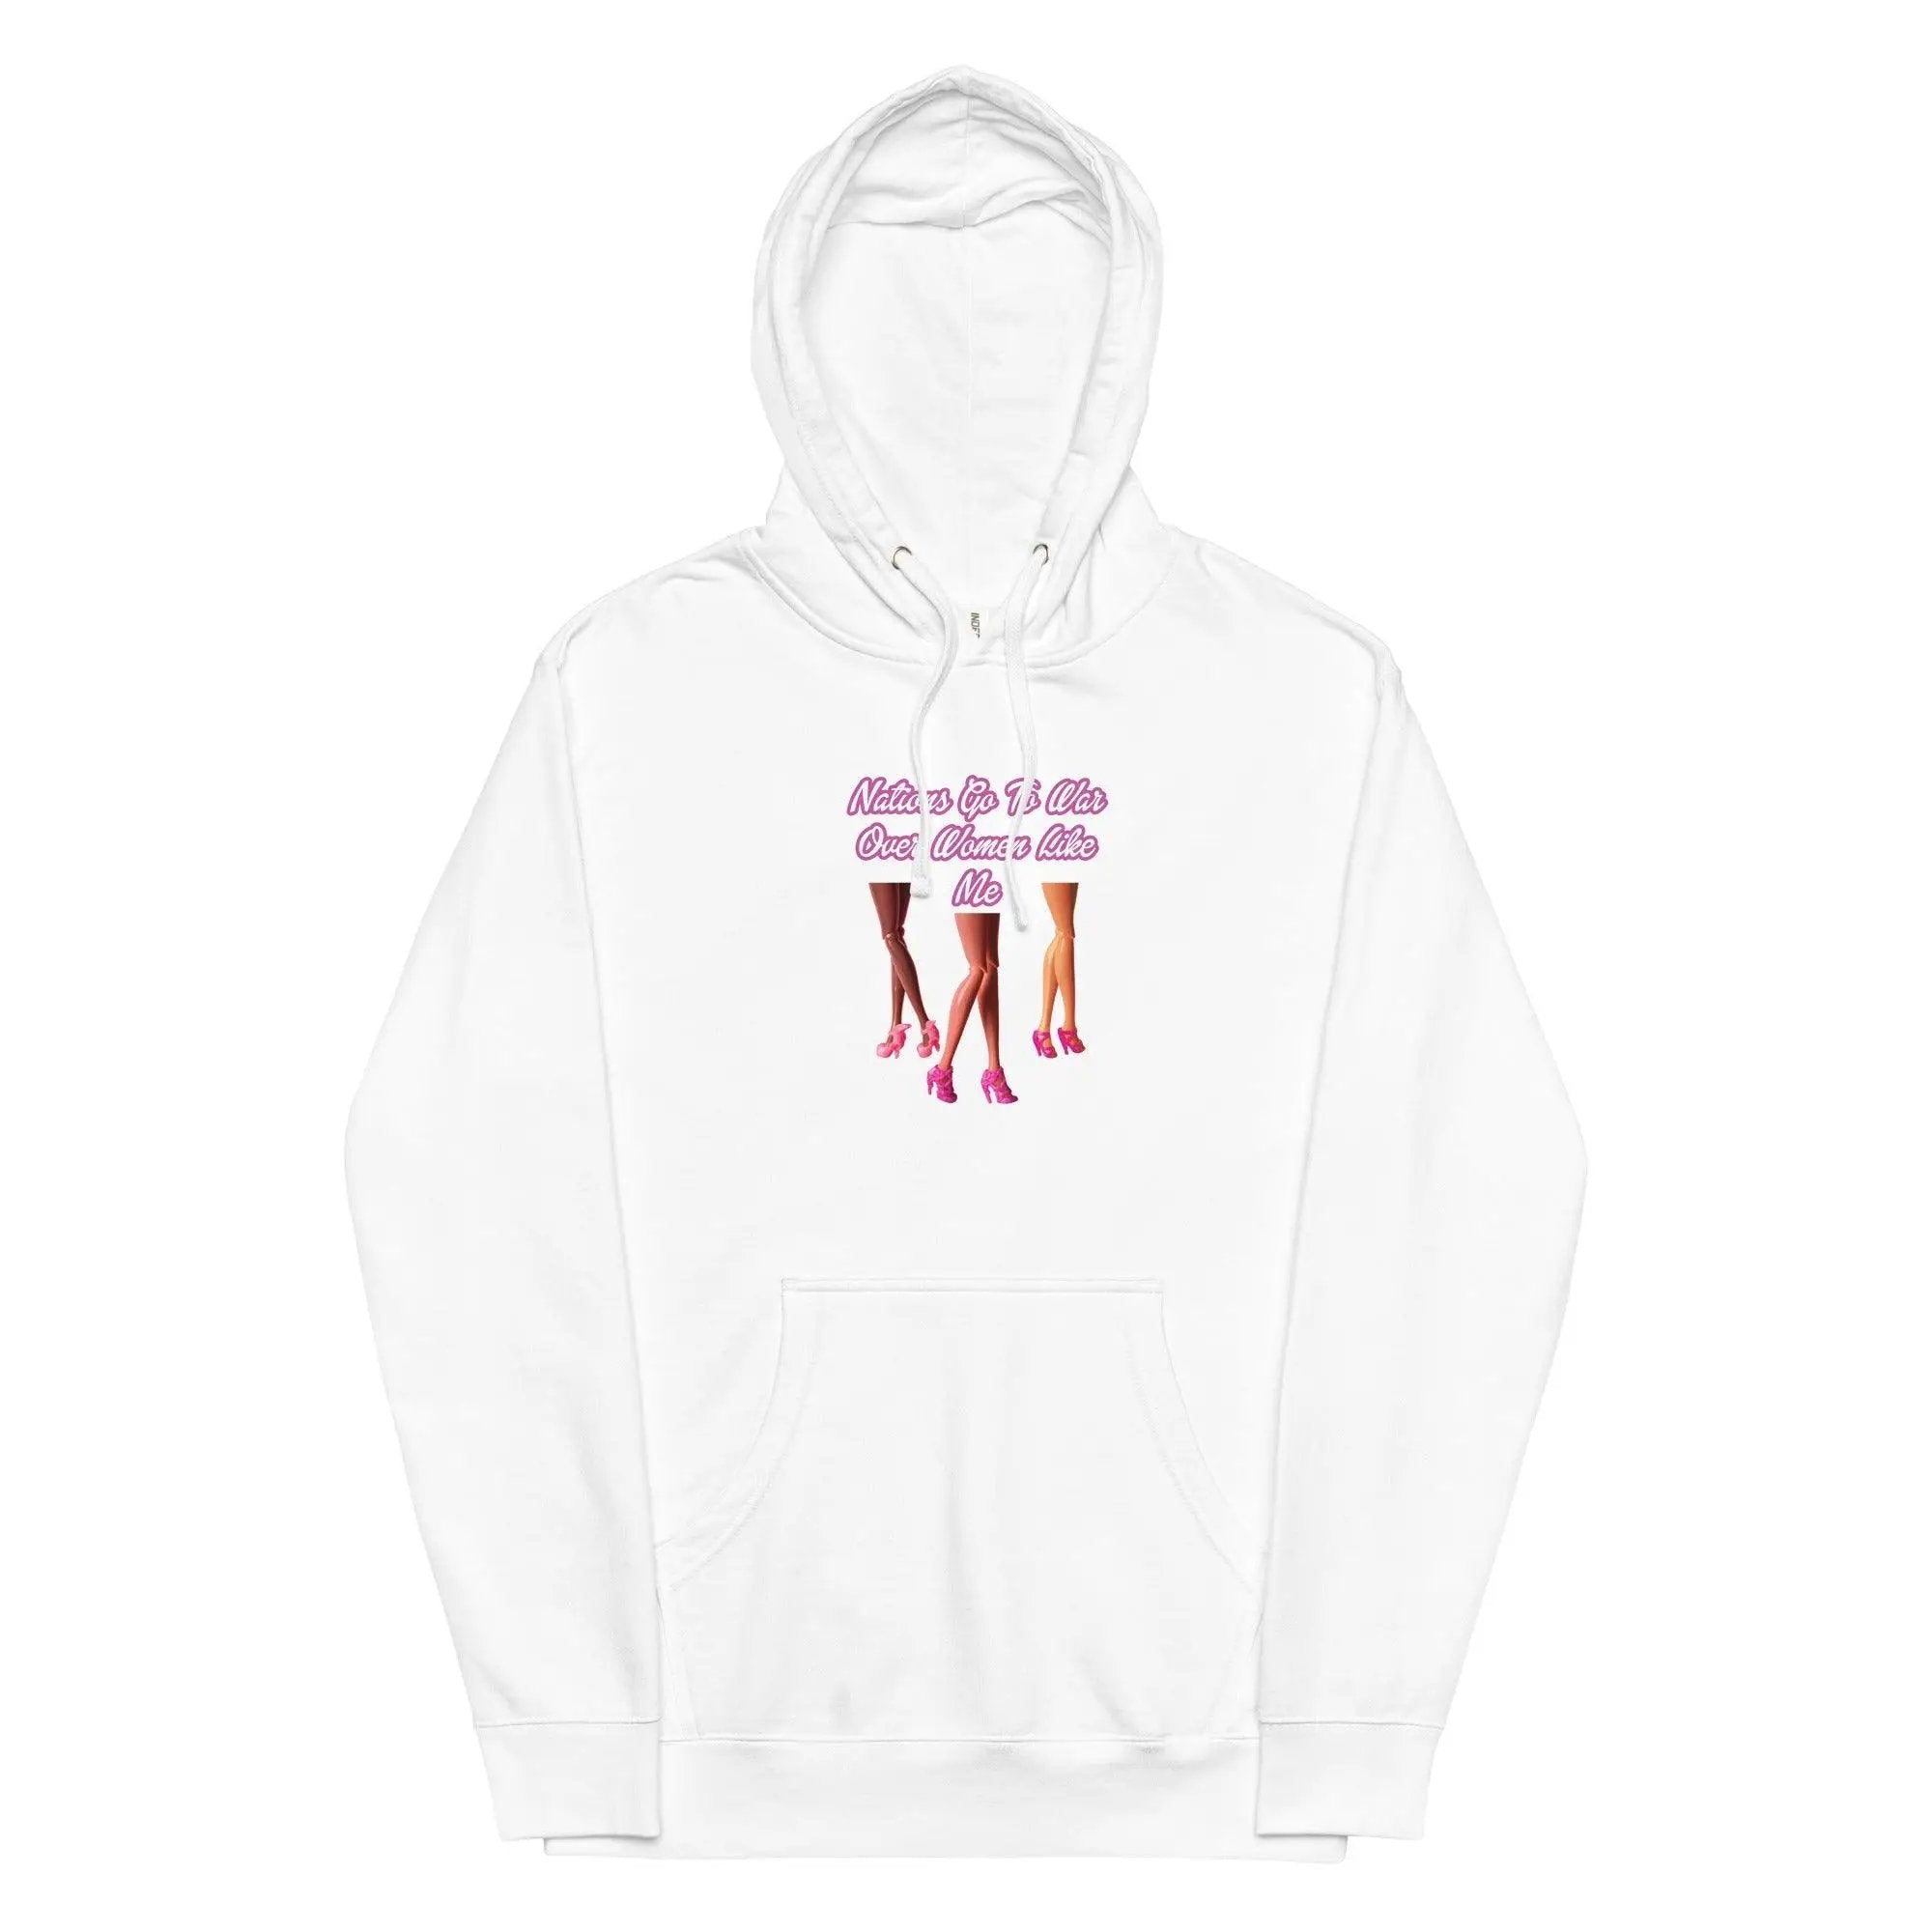 Nations Go To War Over Women Like Me Unisex midweight hoodie